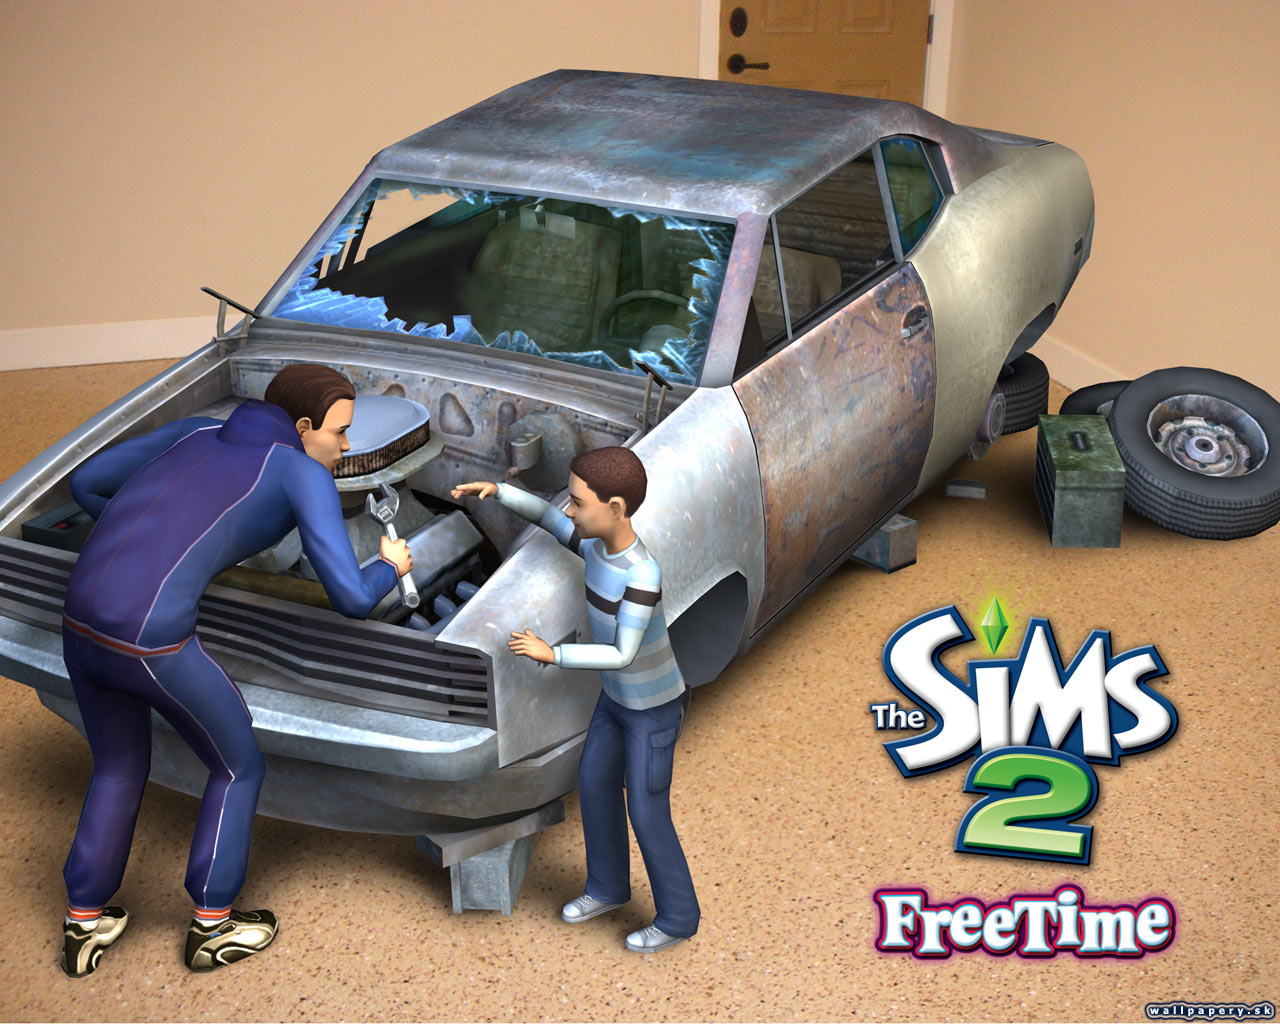 The Sims 2: Free Time - wallpaper 5